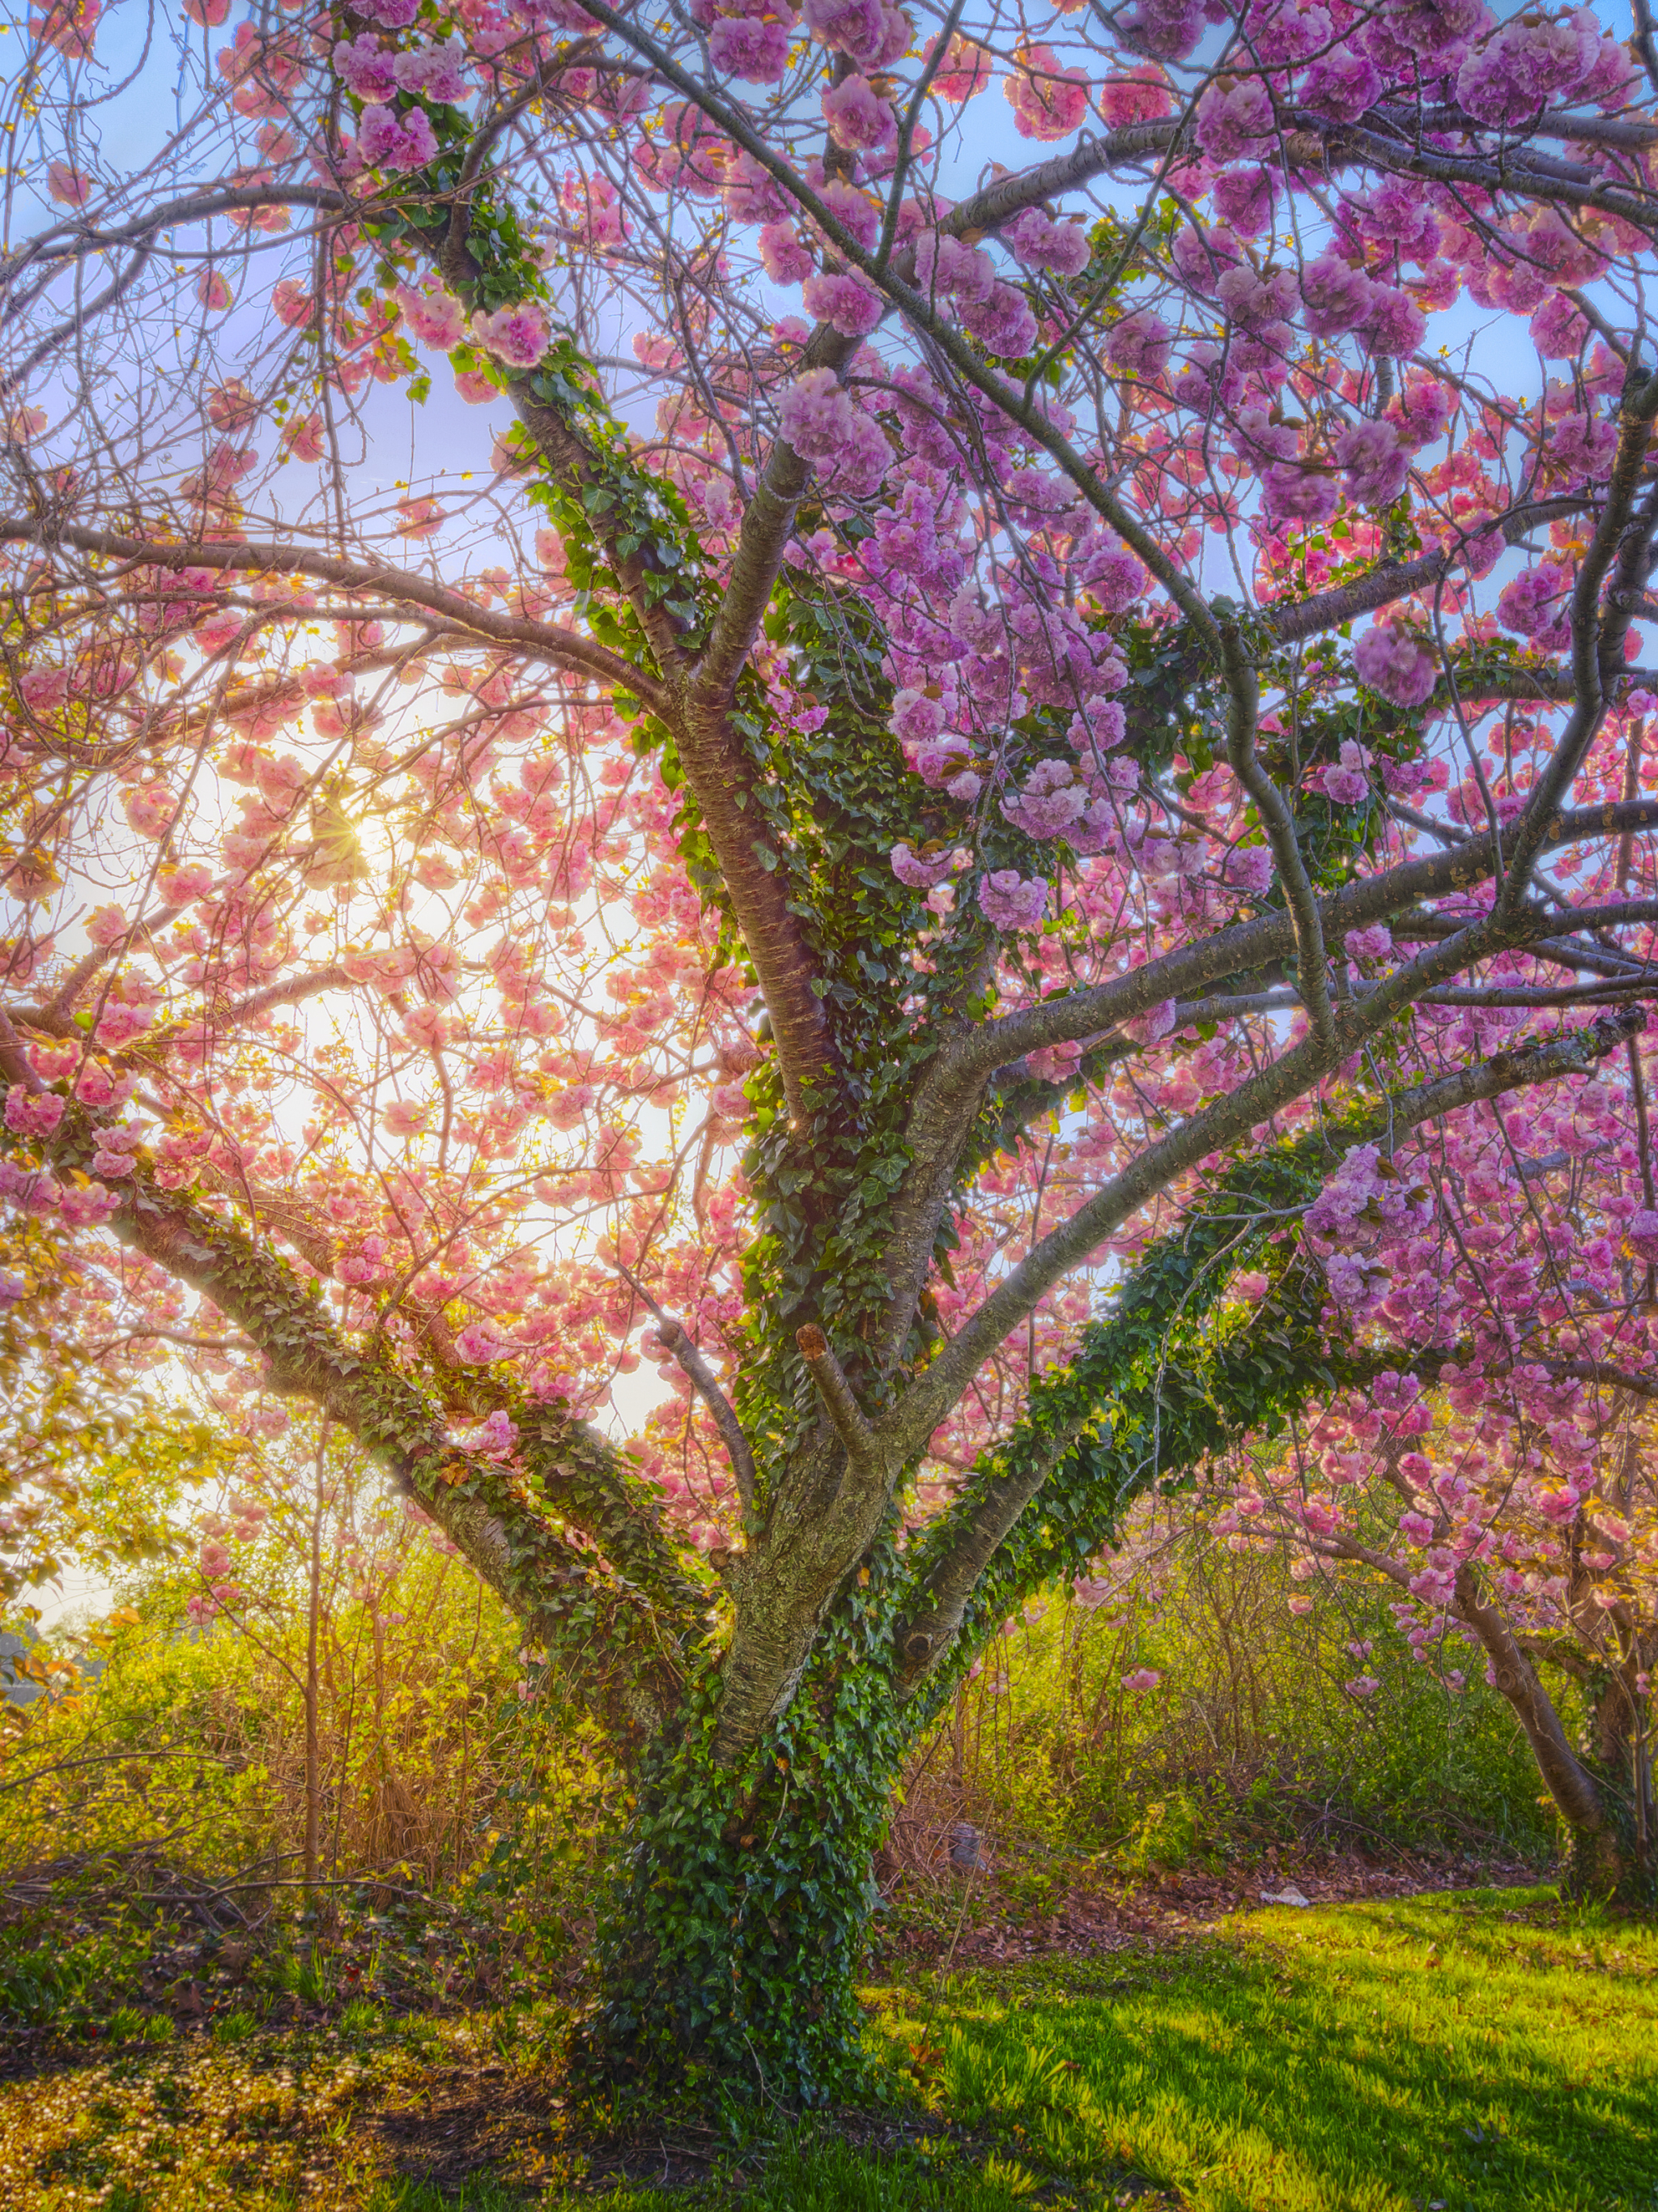 HD desktop wallpaper: Flowers, Tree, Earth, Spring, Cherry Blossom, Blossom, Sunshine, Cherry Tree download free picture